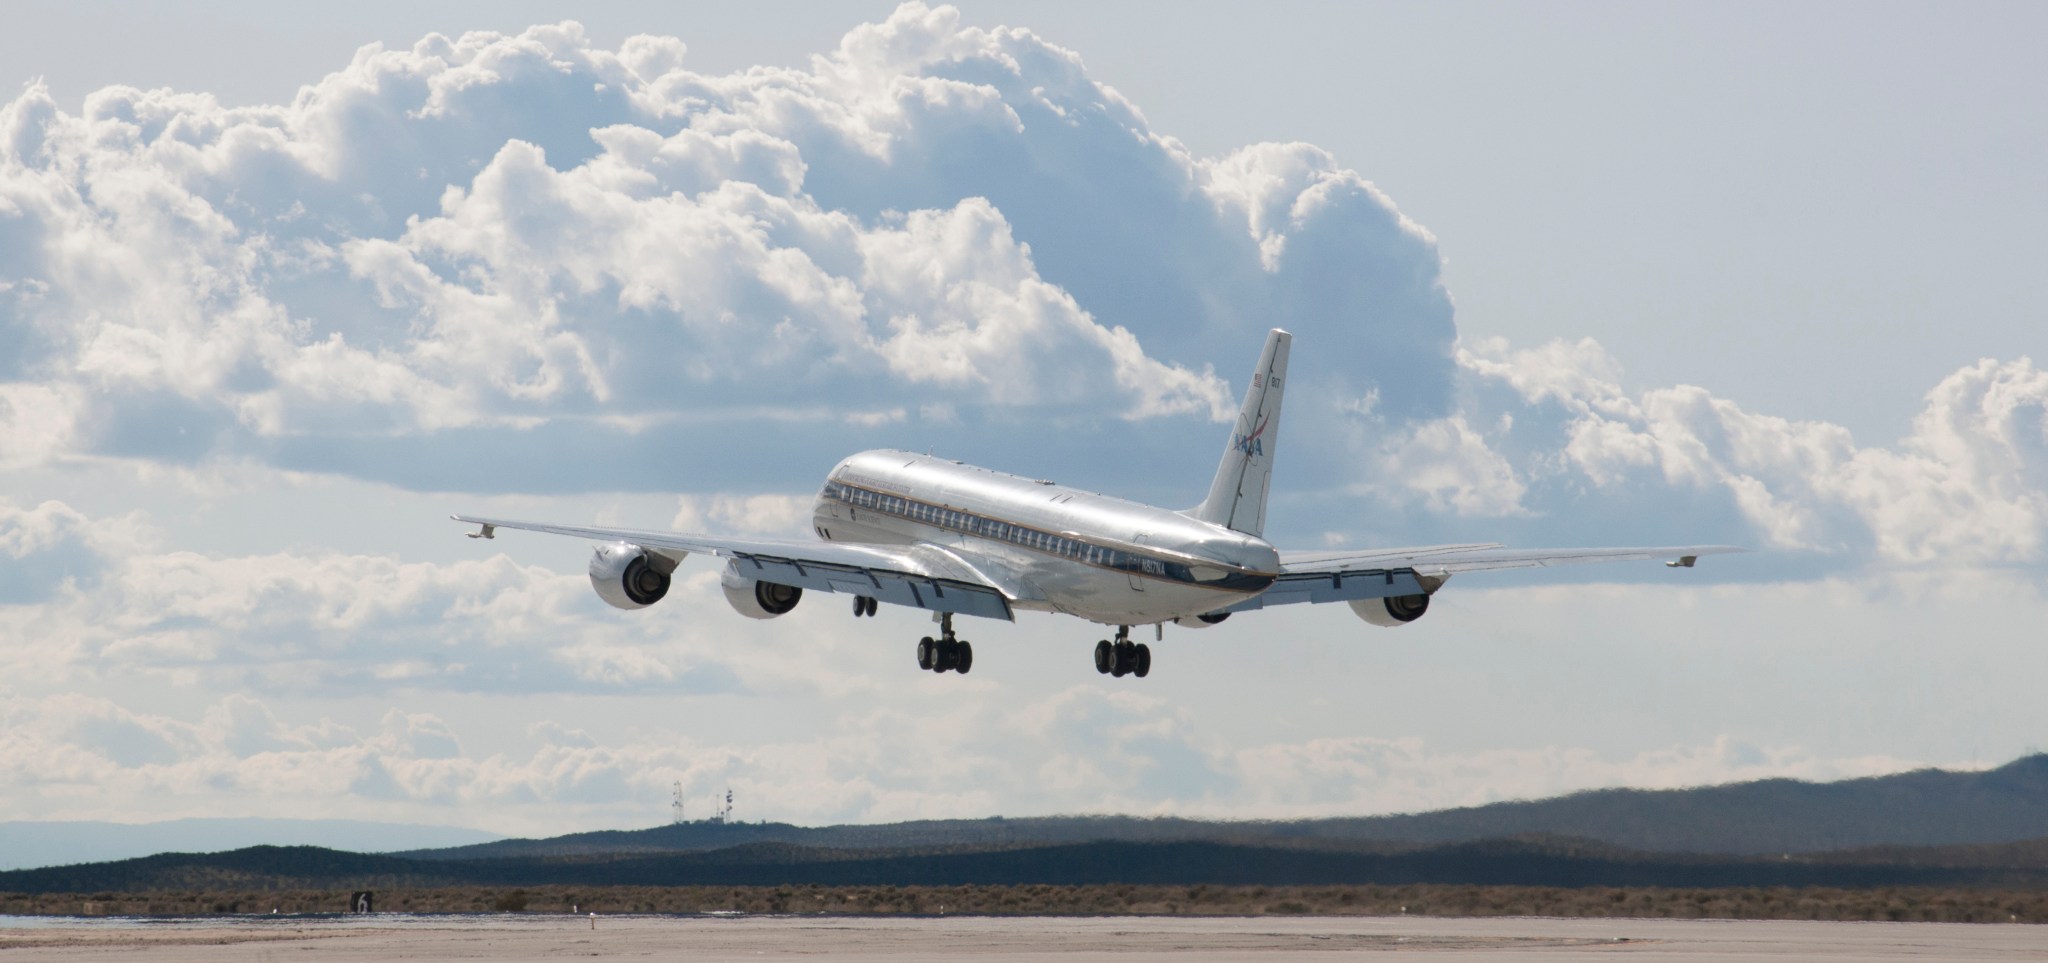 NASA's DC-8 aircraft takes off from its base operations in Palmdale, California on a mission aimed at studying polar winds.